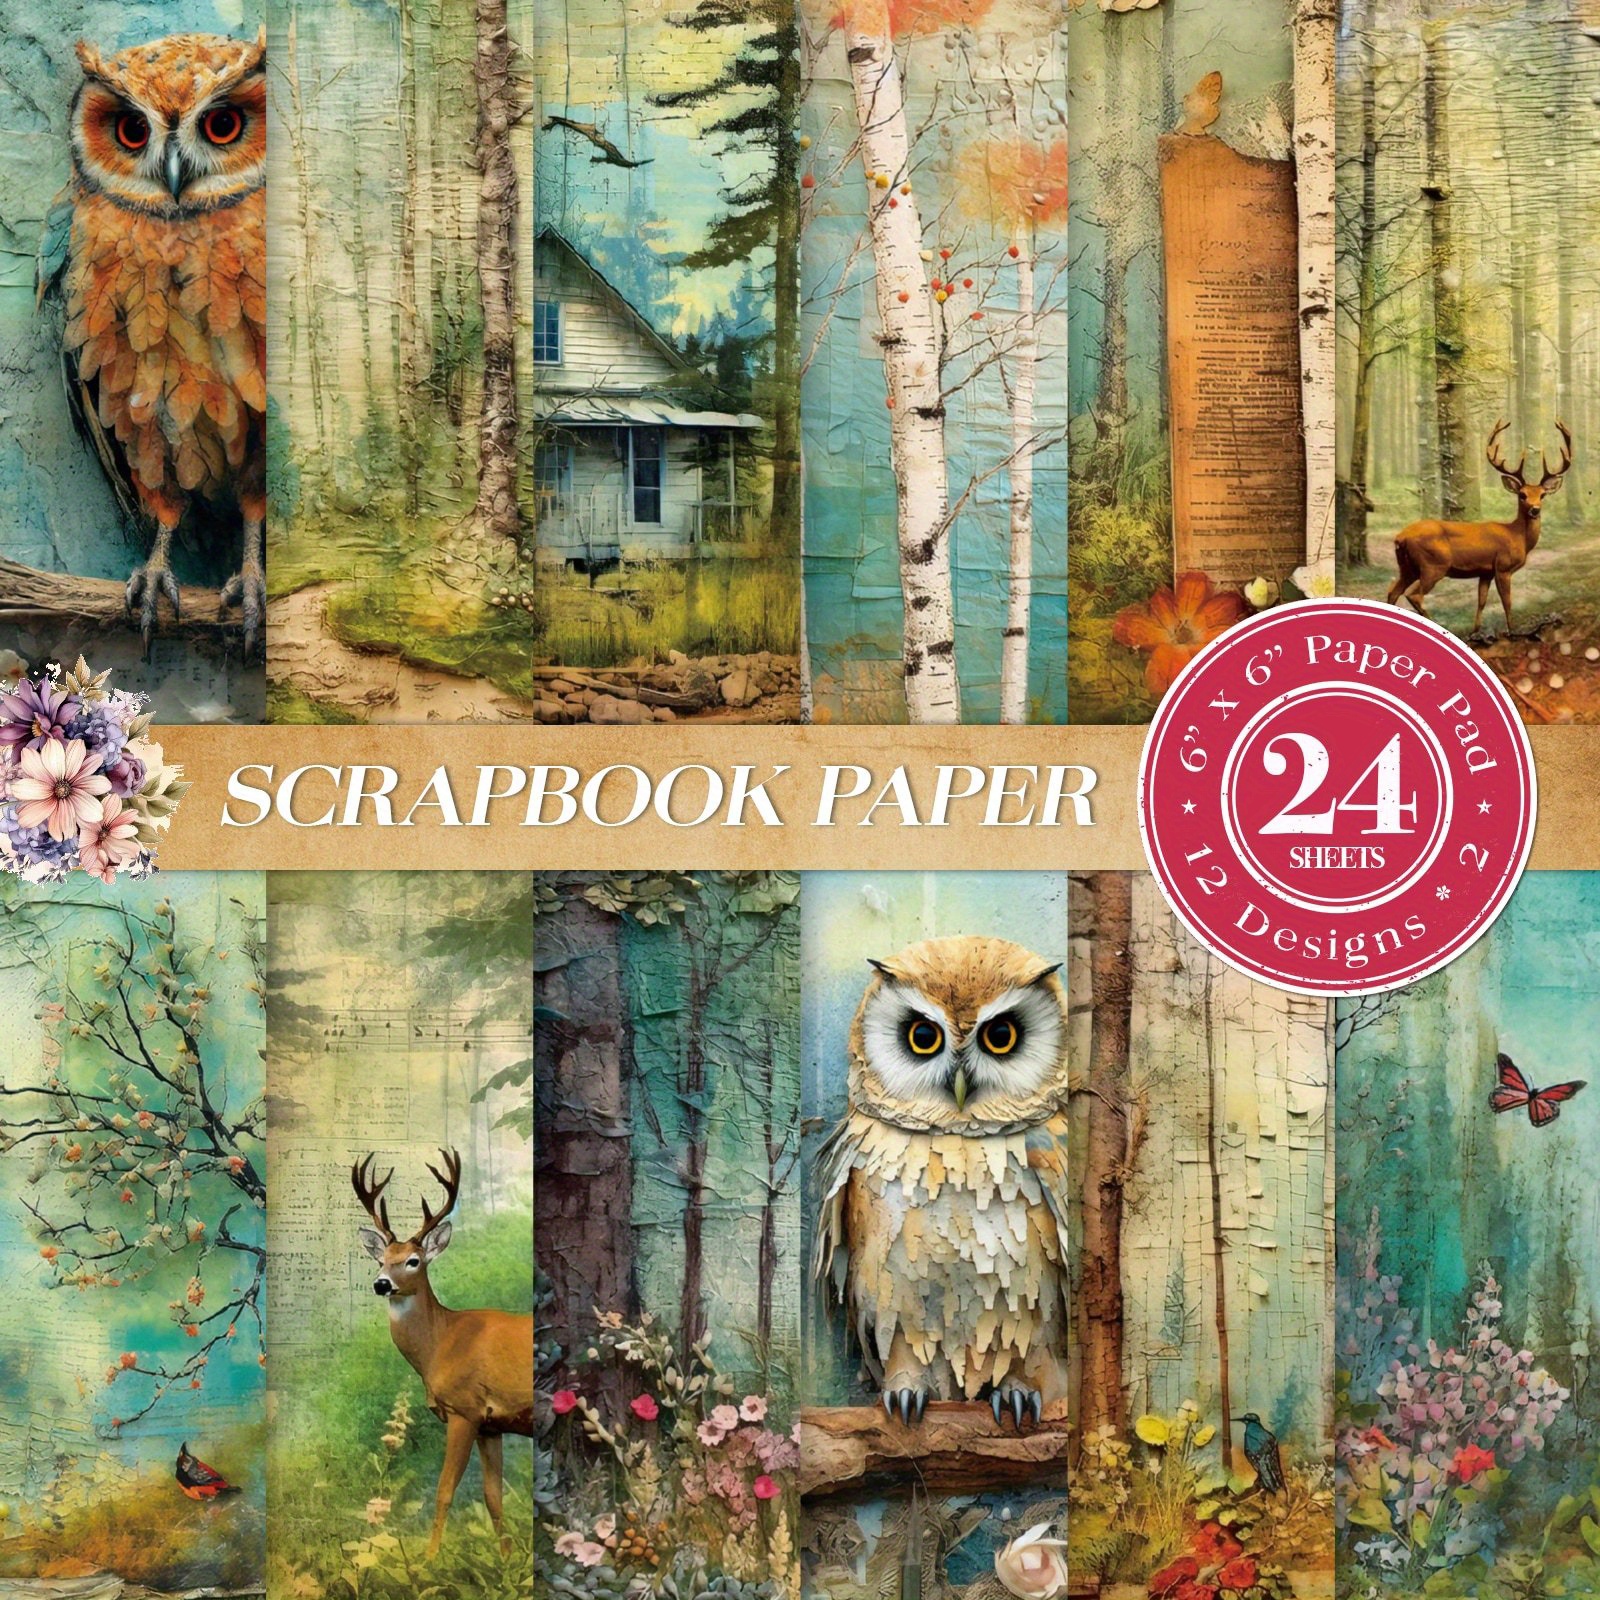 

24 Forest Theme Scrapbook Papers: Forest Animals & Nature Scenes, 6x6 Inch Pattern Papers, Perfect For Diy Handmade Crafts, Journals, Greeting Cards, Albums, And Gift Wrapping